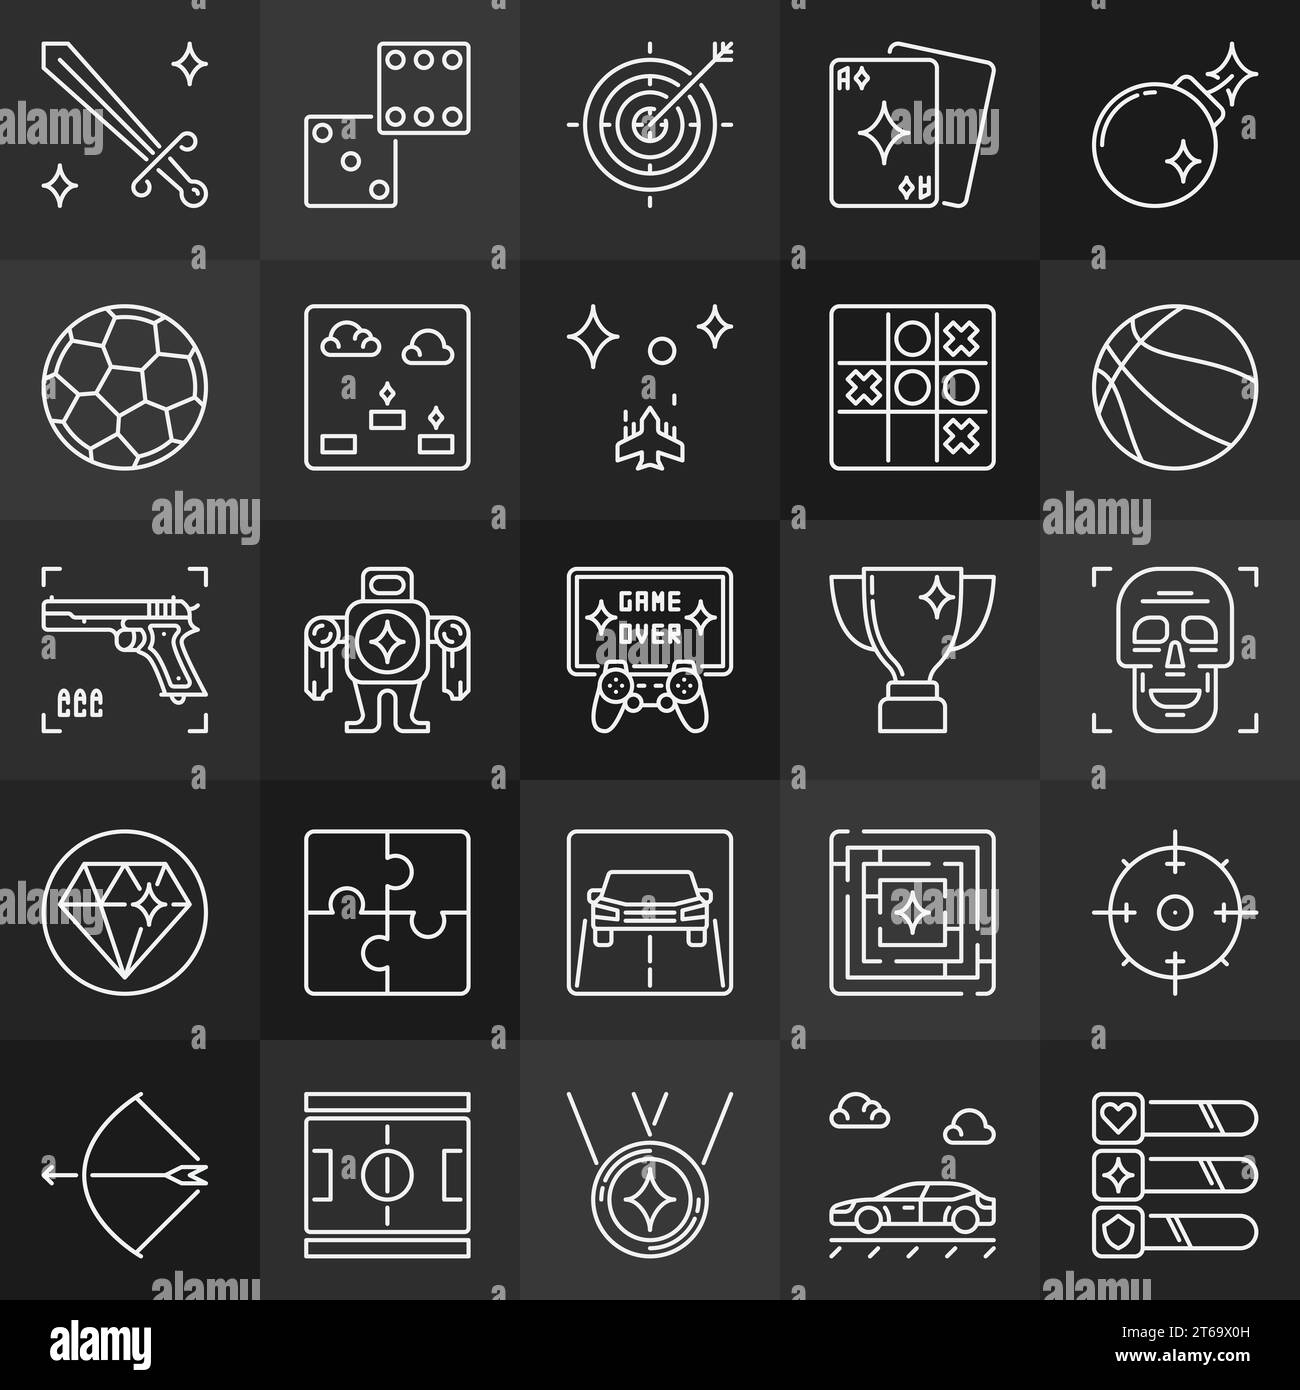 Game outline concept icons. Videos games and gaming linear signs on dark background Stock Vector